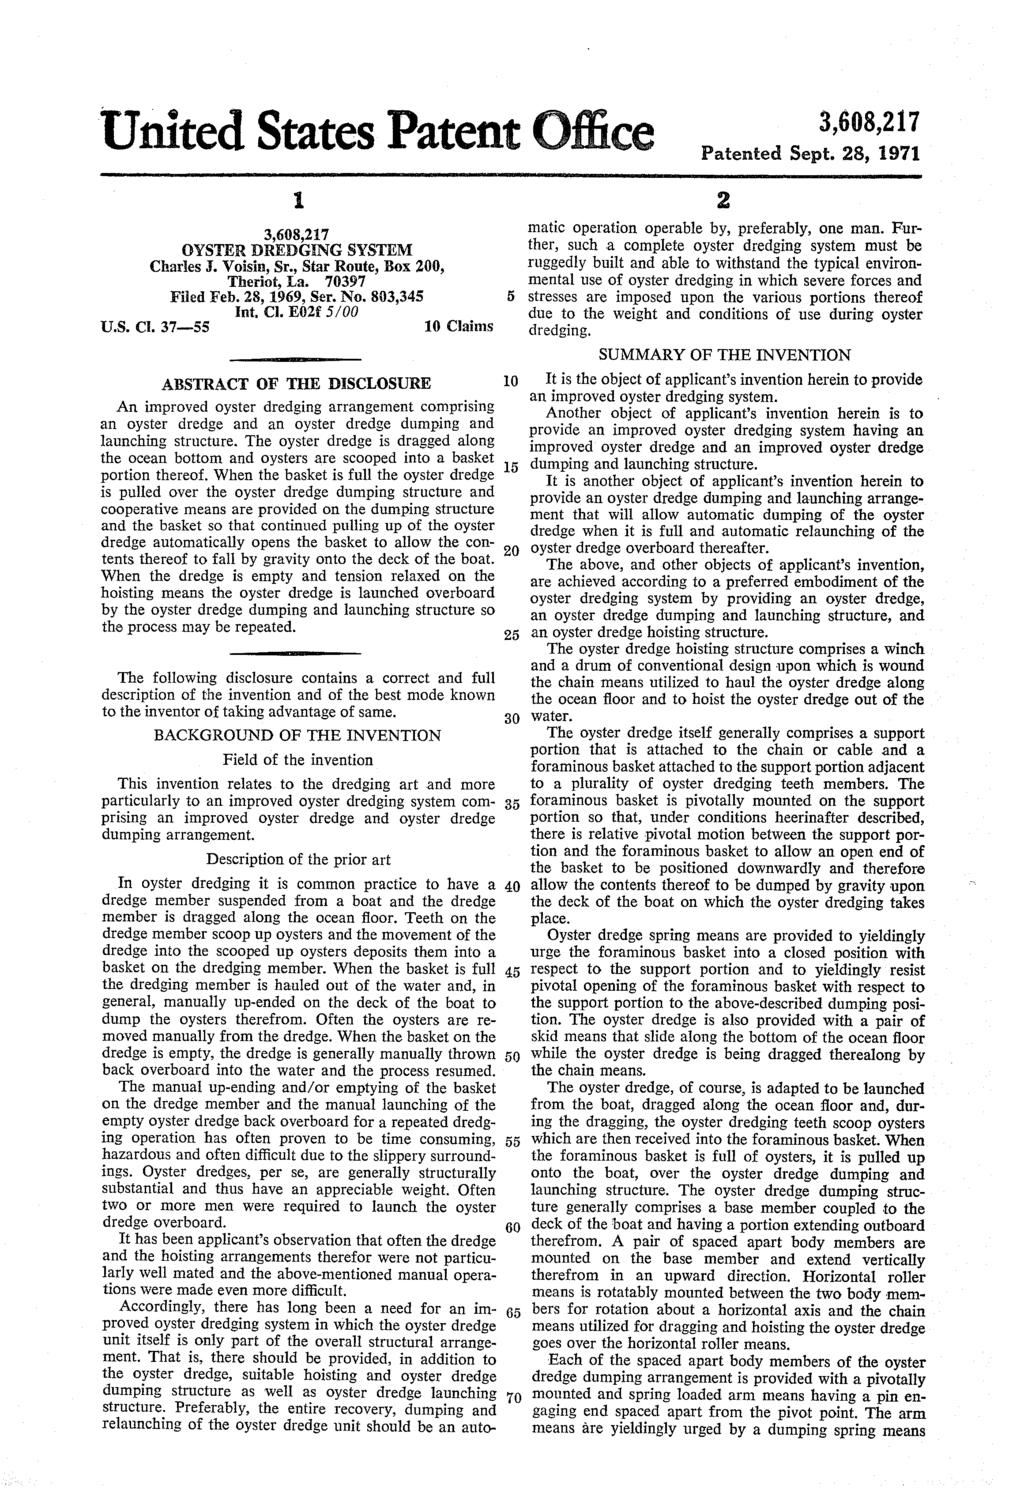 United States Patent Office OYSTER OREDGENG SYSTEM Charles J. Voisin, Sr., Star Route, Box 200, Theriot, La. 70397 Fided Feb. 28, 1969, Ser. No. 803,345 Int, Cl. E02f 5/00 U.S. Ct.